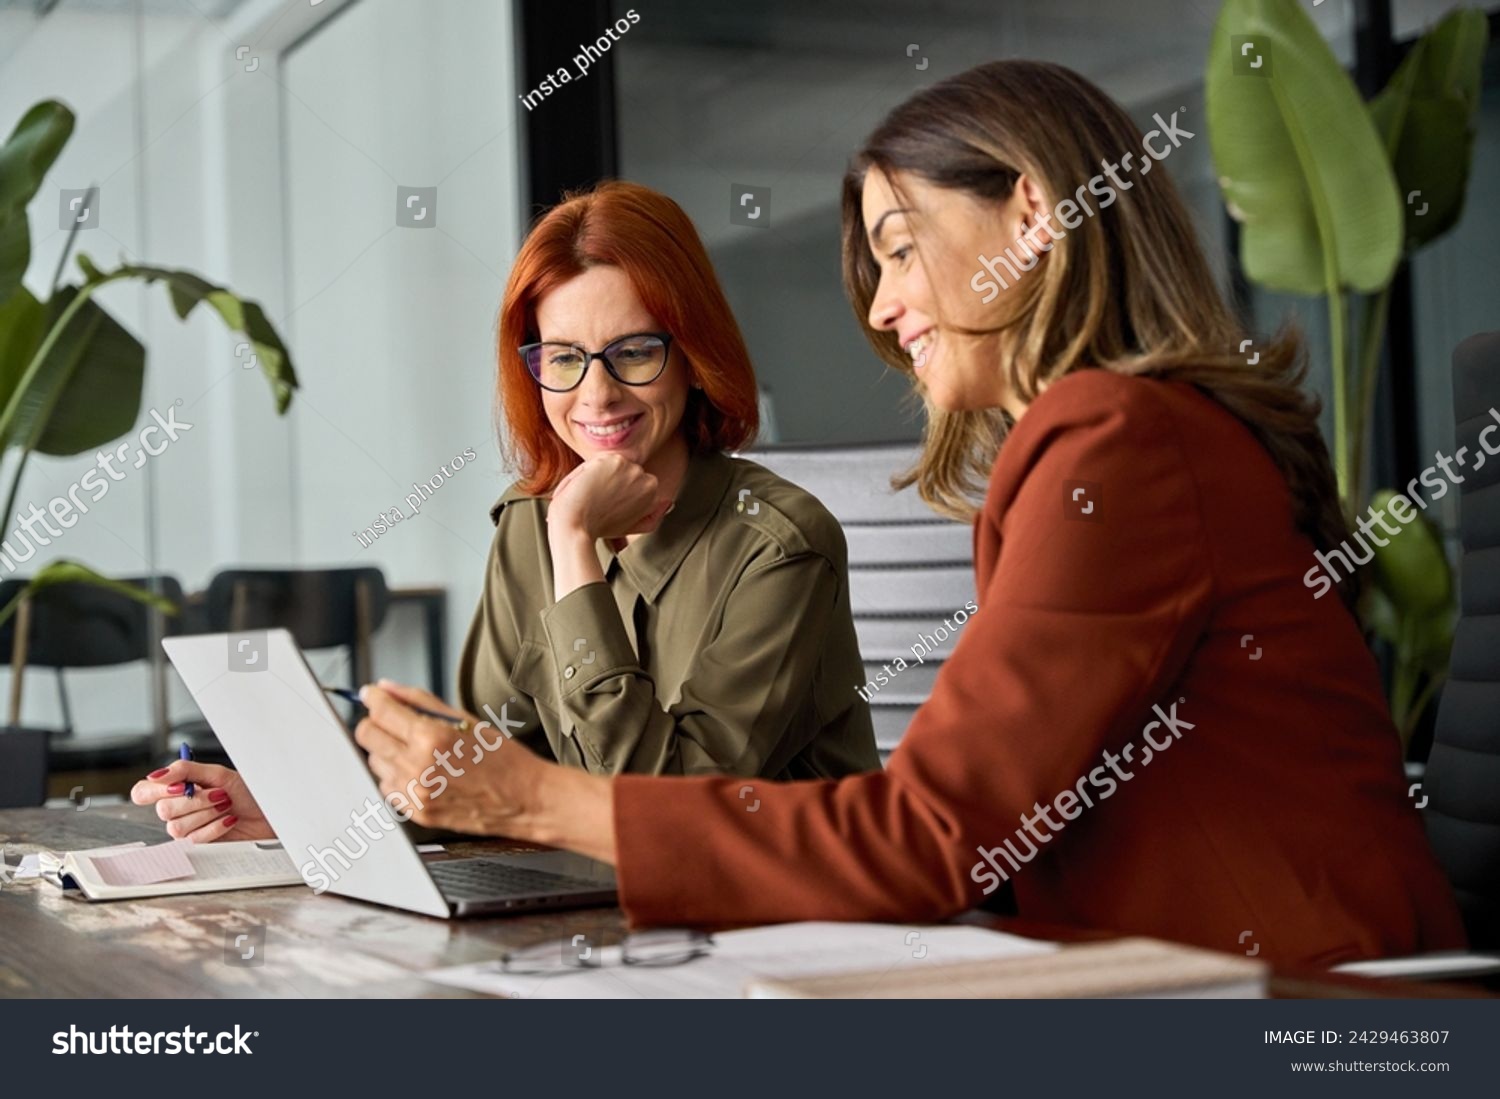 Two happy busy female employees working together using computer planning project. Middle aged professional business woman consulting teaching young employee looking at laptop sitting at desk in office #2429463807